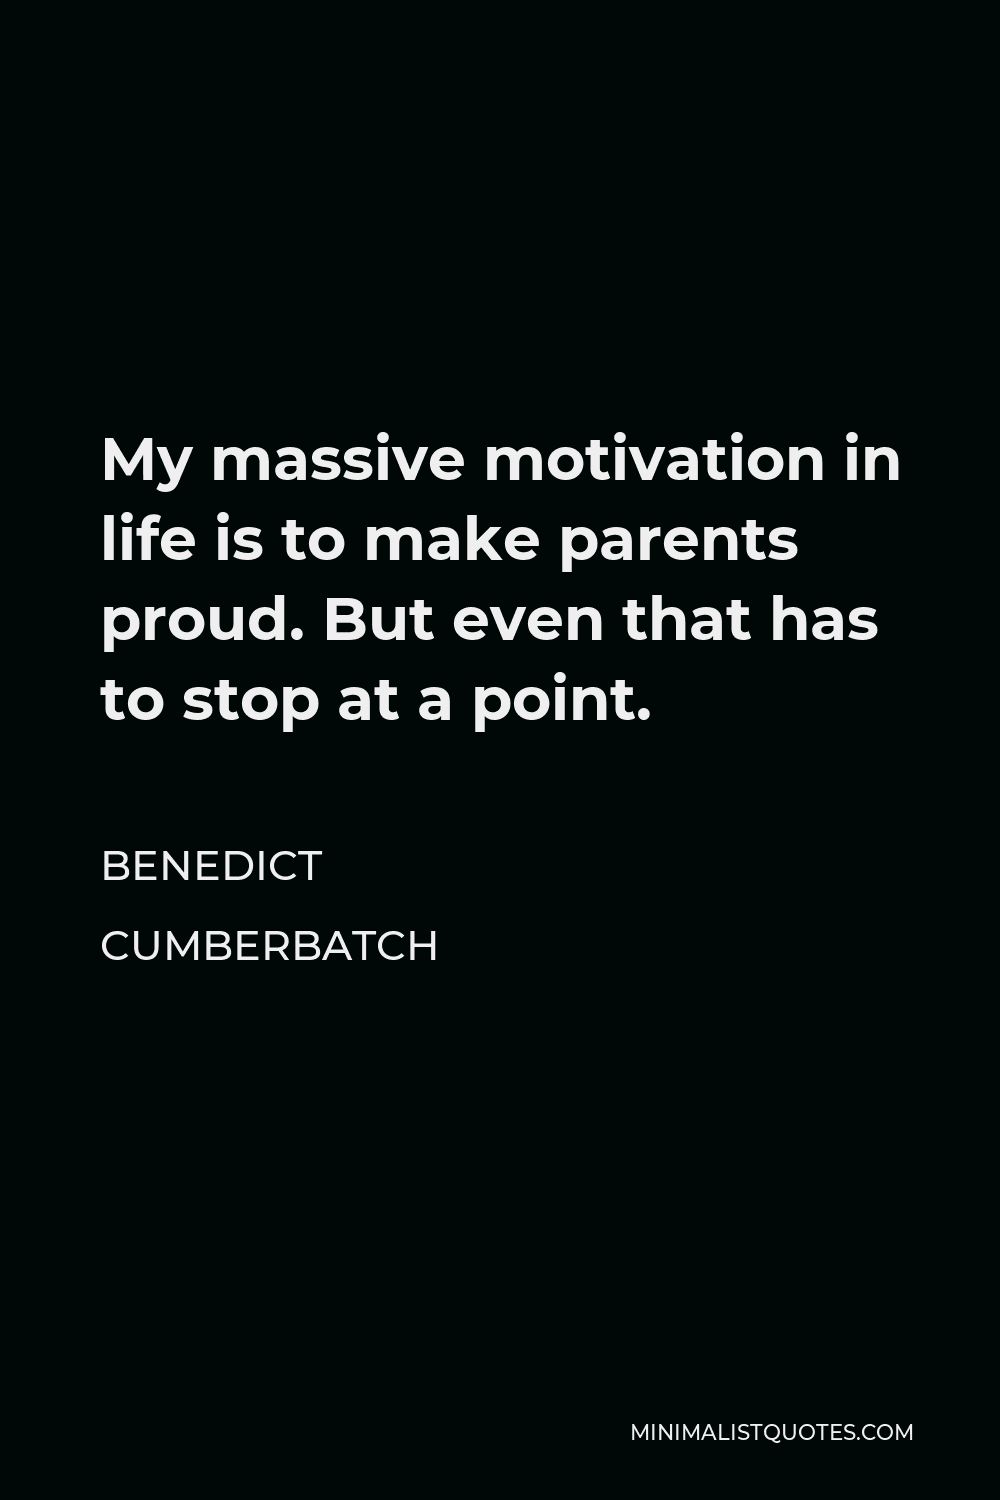 Benedict Cumberbatch Quote - My massive motivation in life is to make parents proud. But even that has to stop at a point.